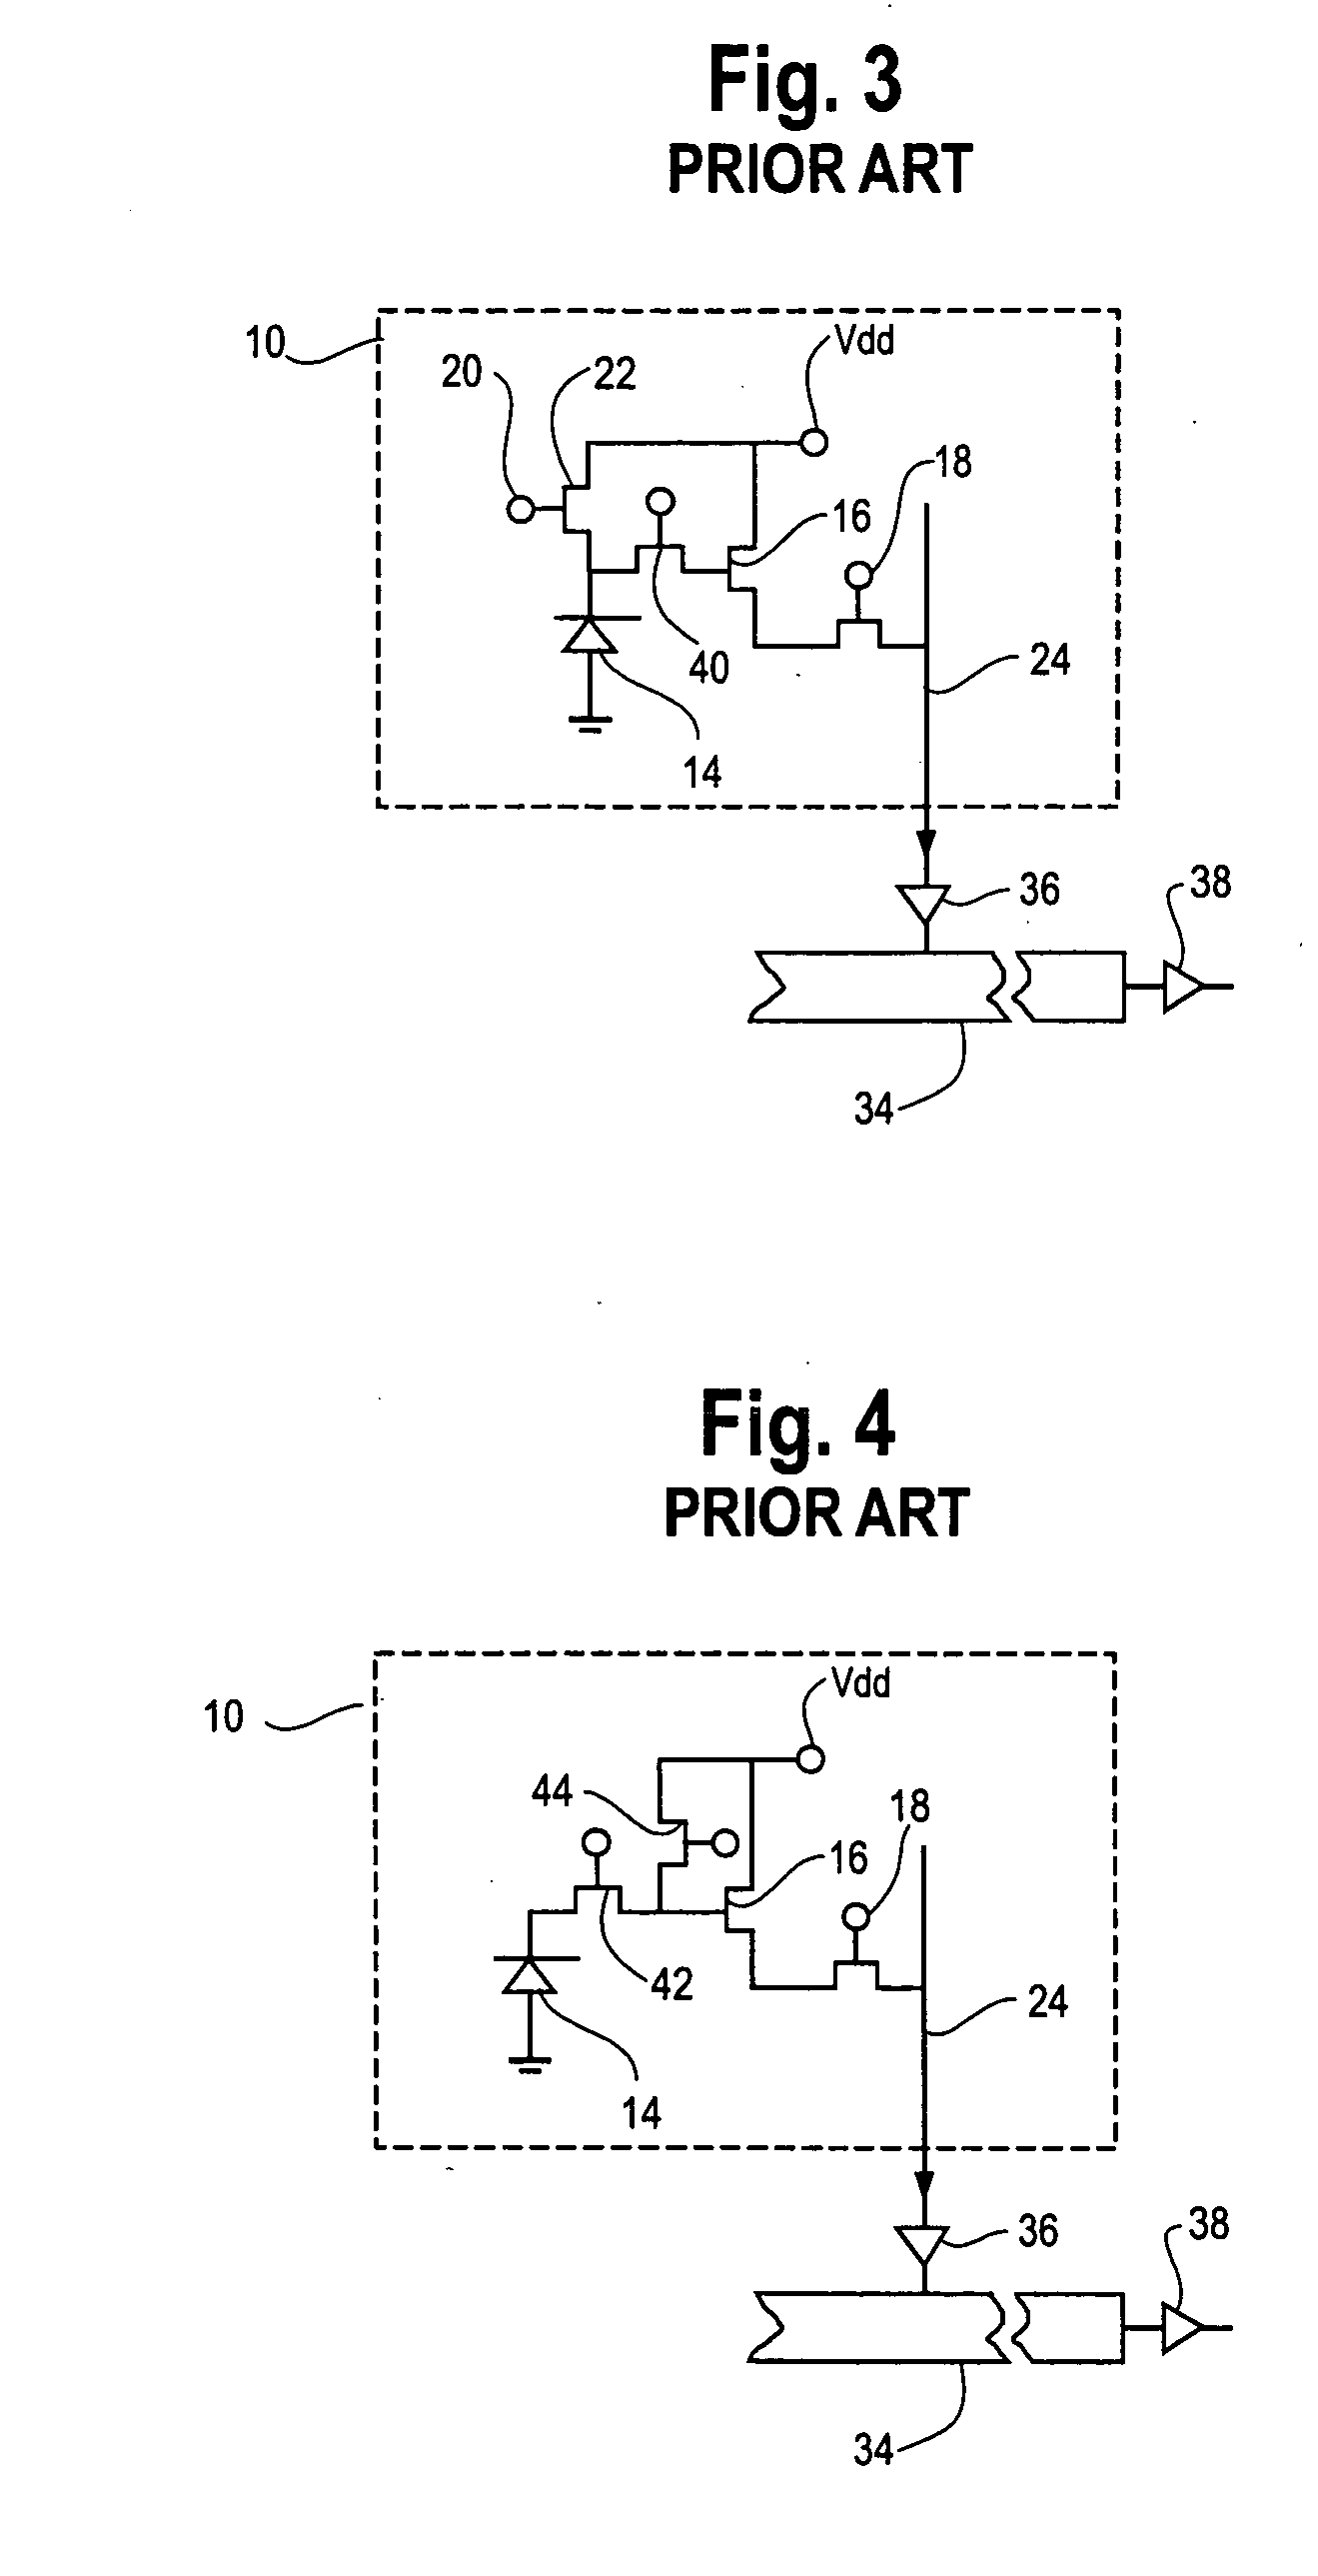 Hybrid infrared detector array and CMOS readout integrated circuit with improved dynamic range